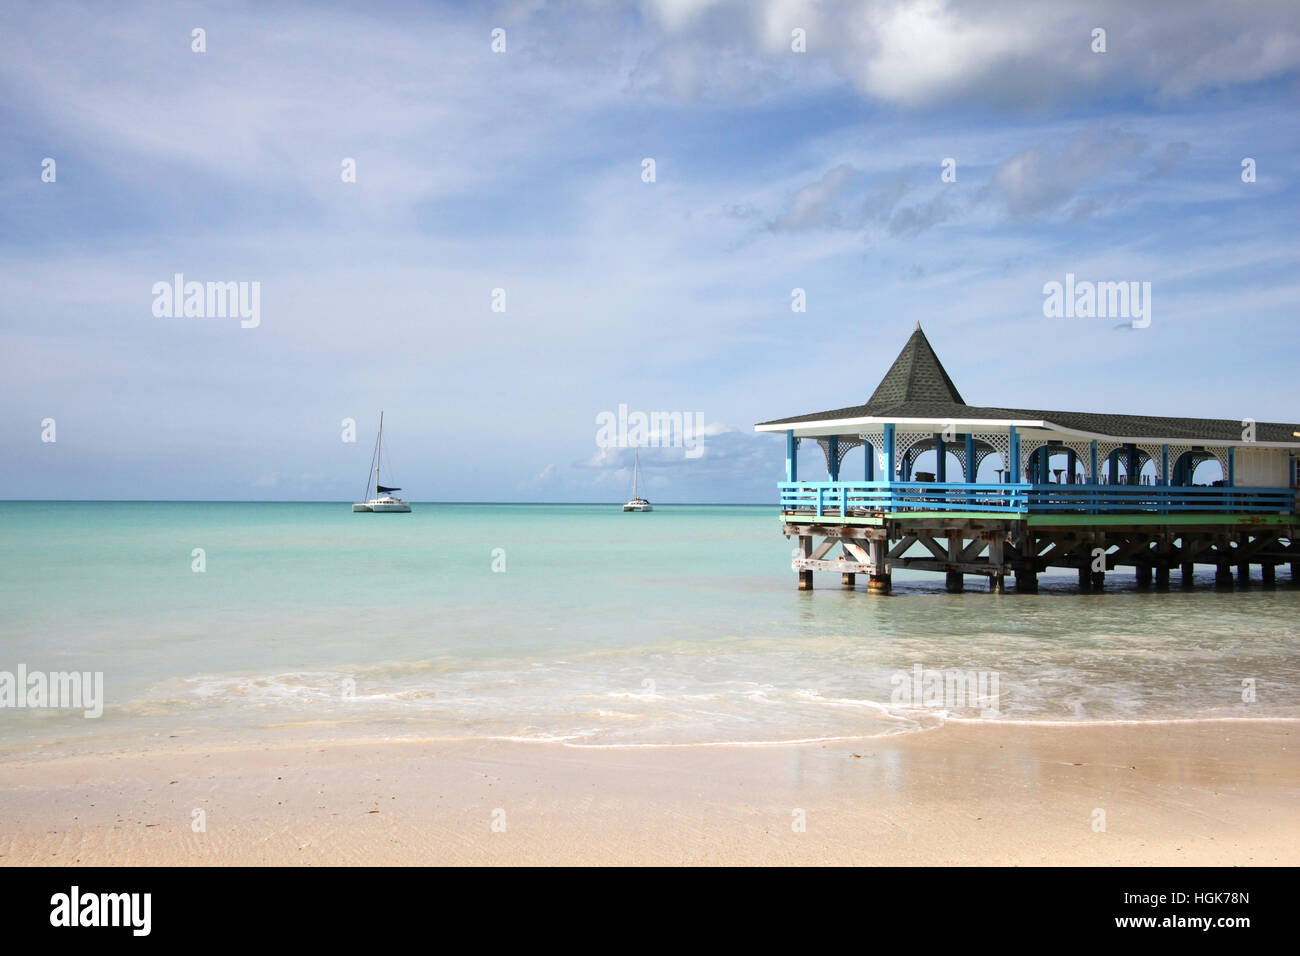 Beautiful day with a view out to sea & the pier of Runaway Beach, Antigua, Caribbean. Stock Photo